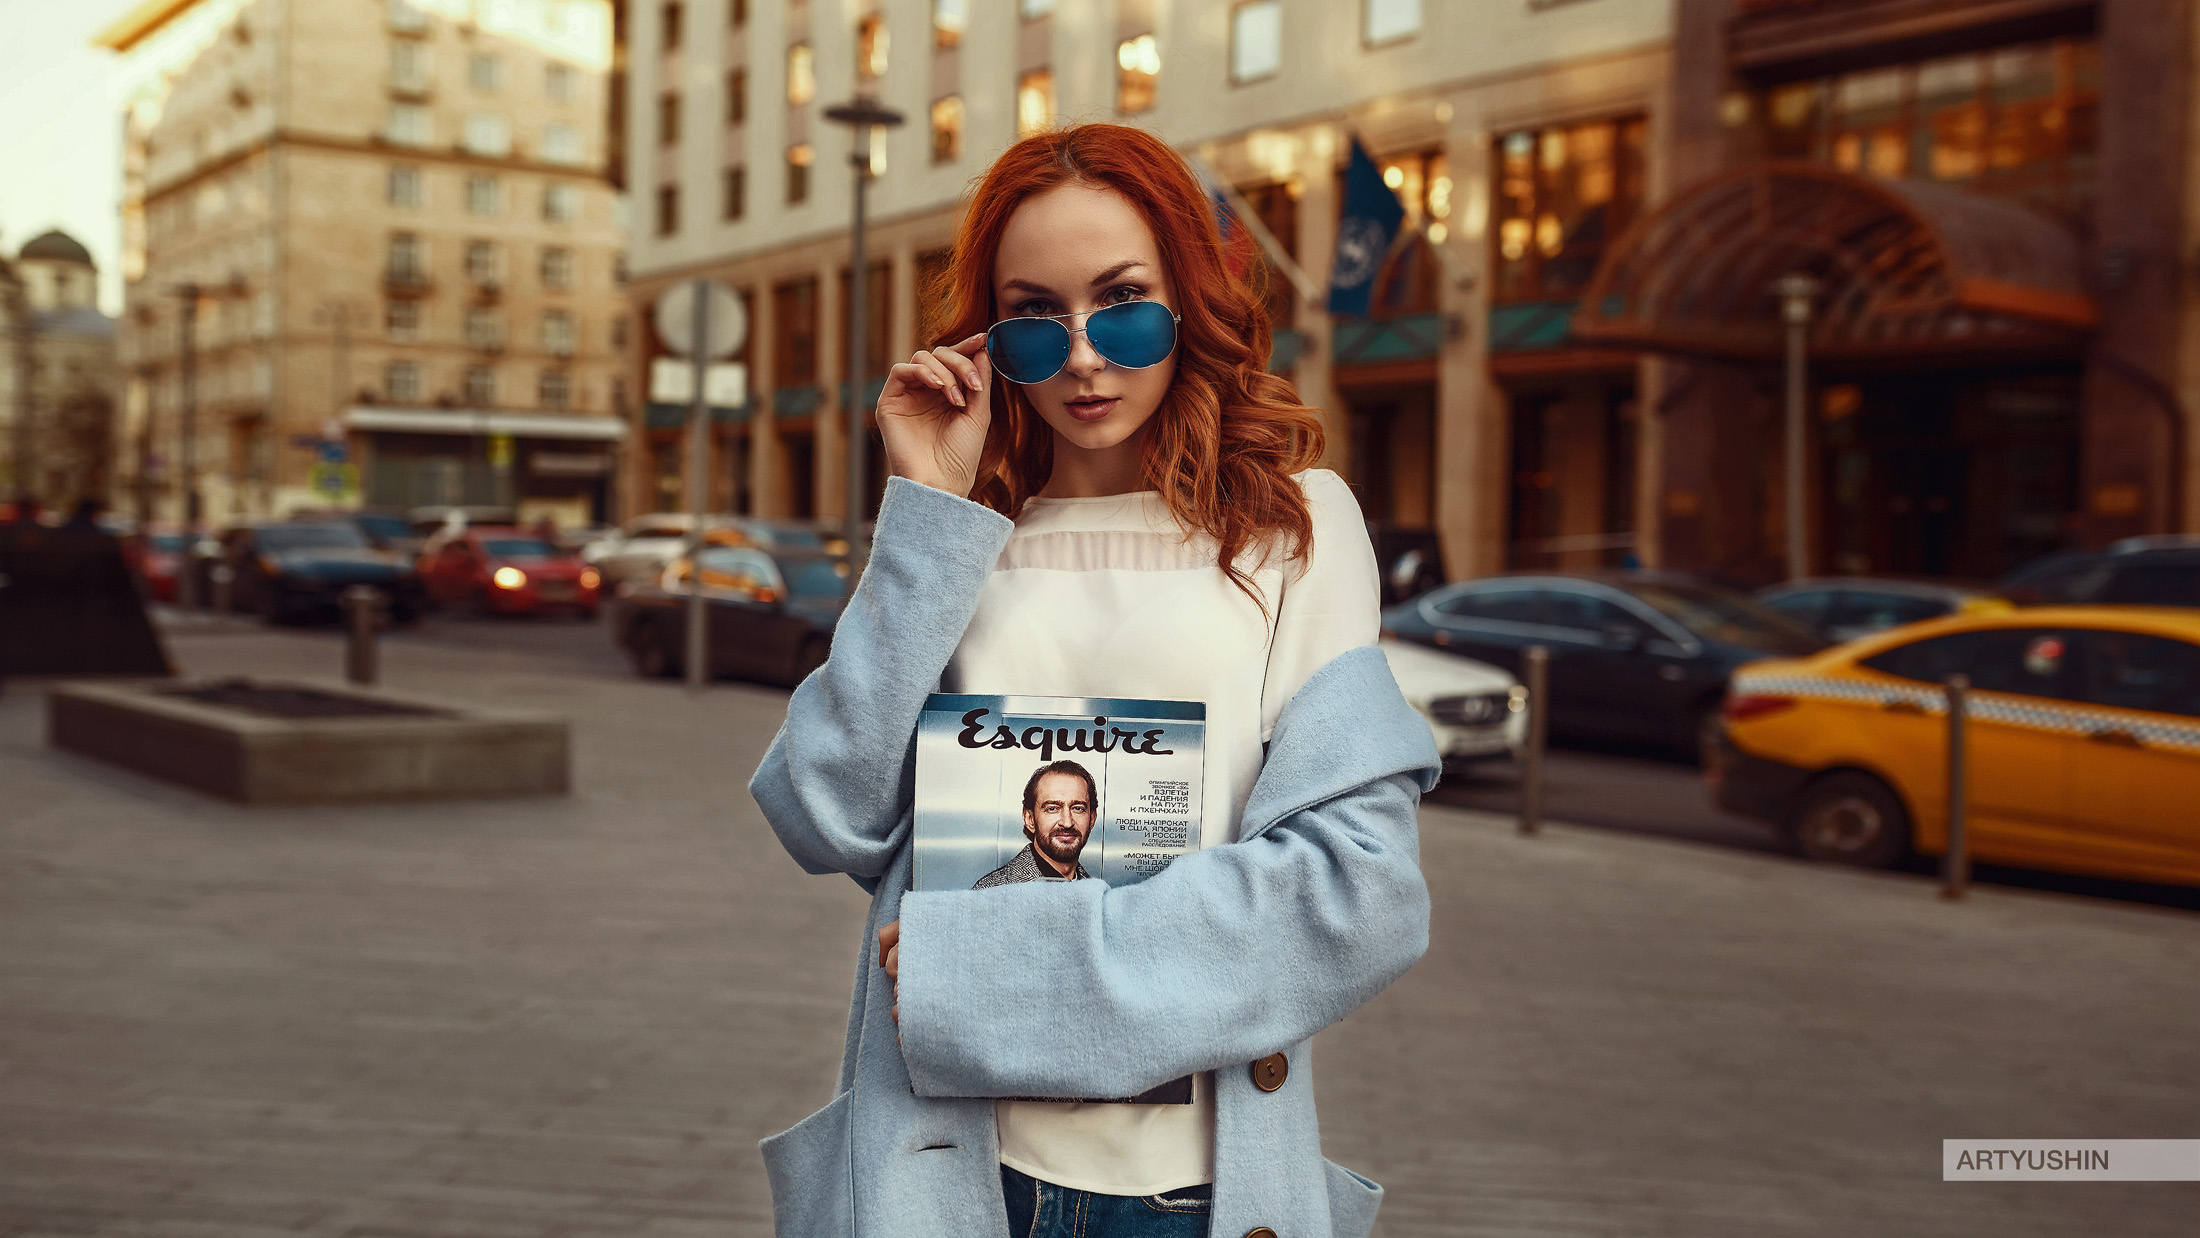 People 2200x1238 Anton Artyushin women model redhead women with shades looking at viewer depth of field portrait women outdoors street Anna Boevaya watermarked outdoors Russia Moscow